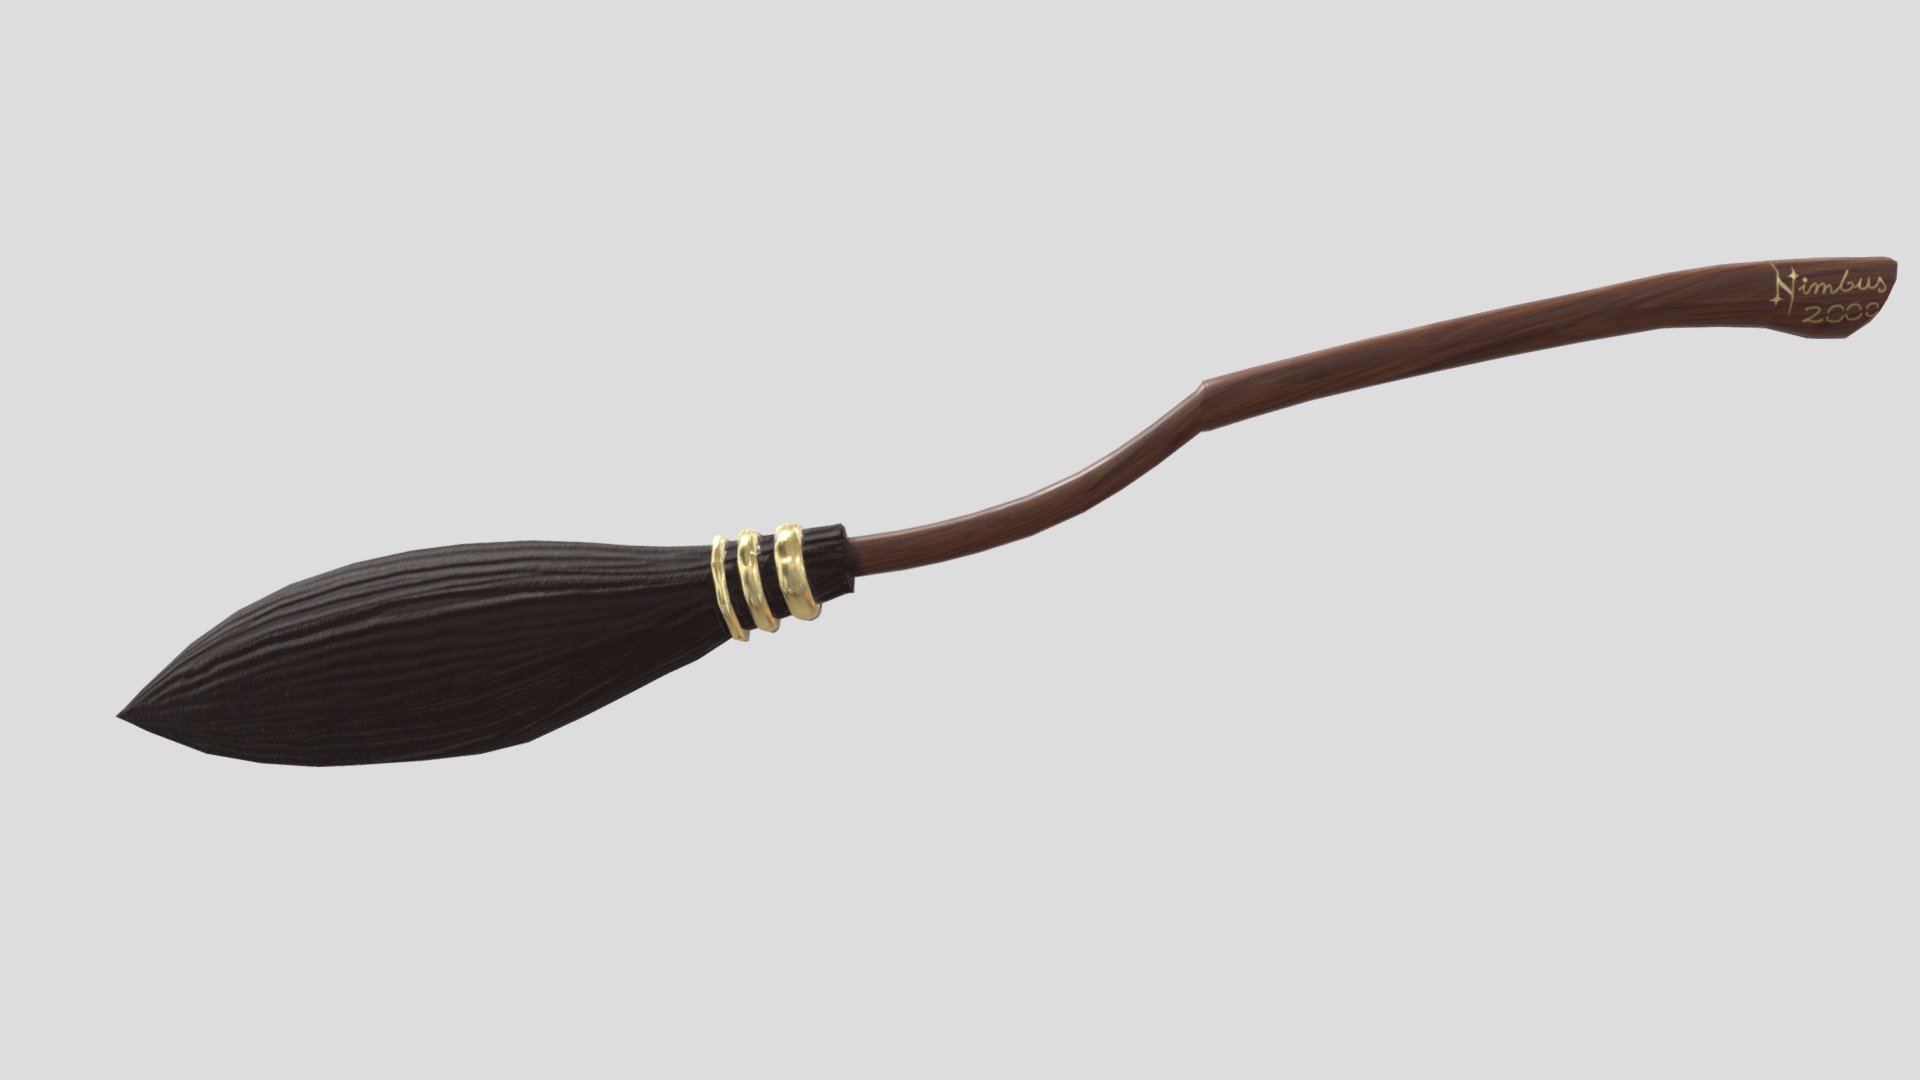 This is my college project for my Game Assets class. To create this &ldquo;Nimbus 2000